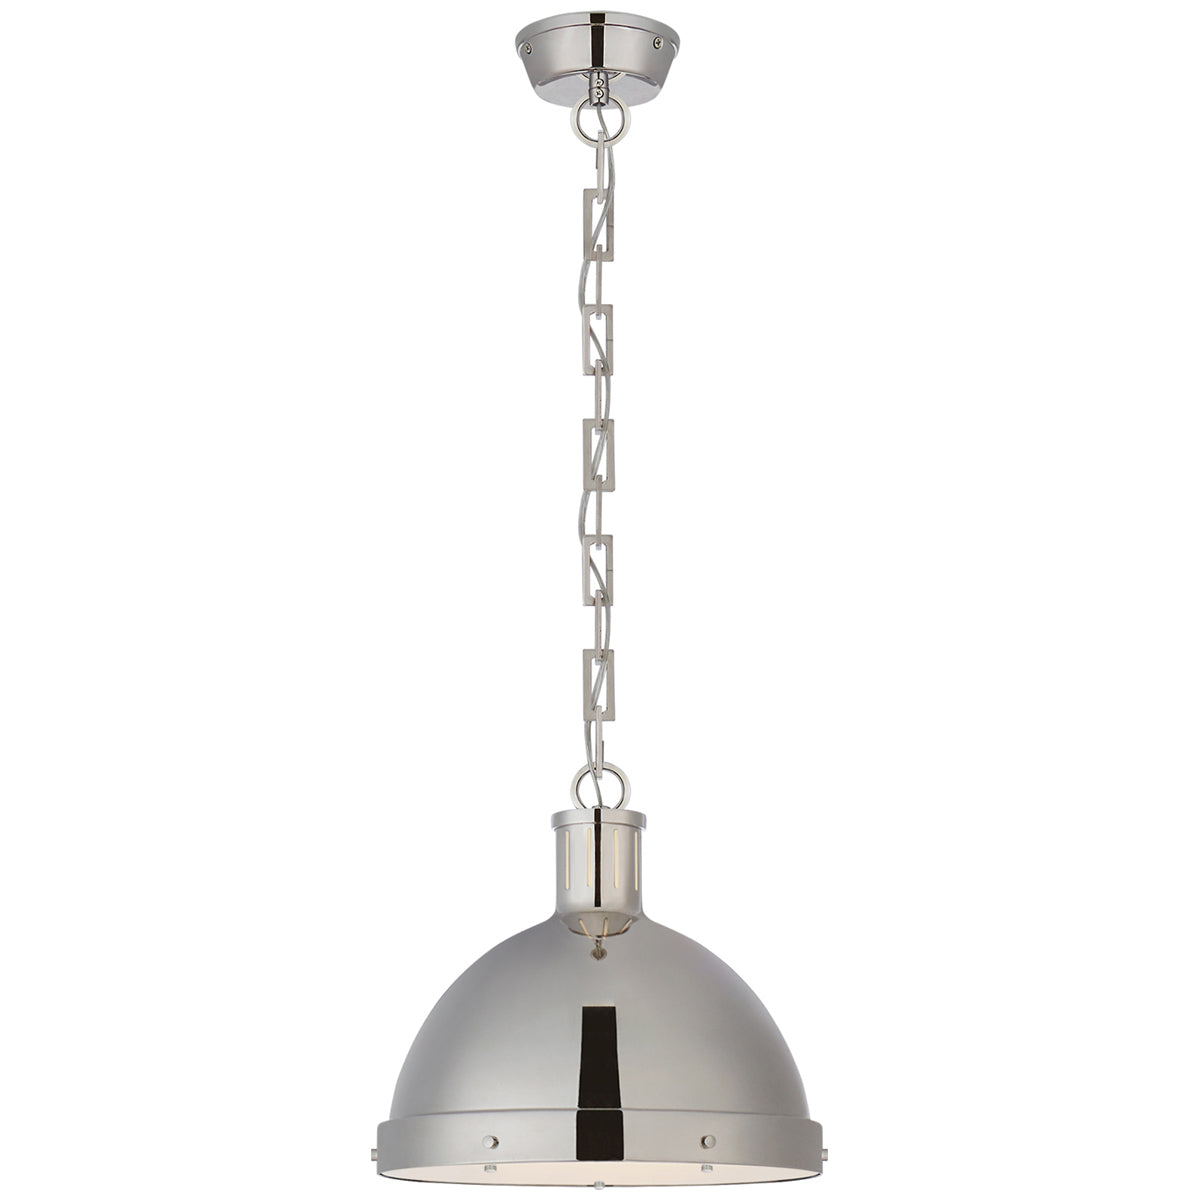 Visual Comfort Hicks Large Pendant with Acrylic Diffuser